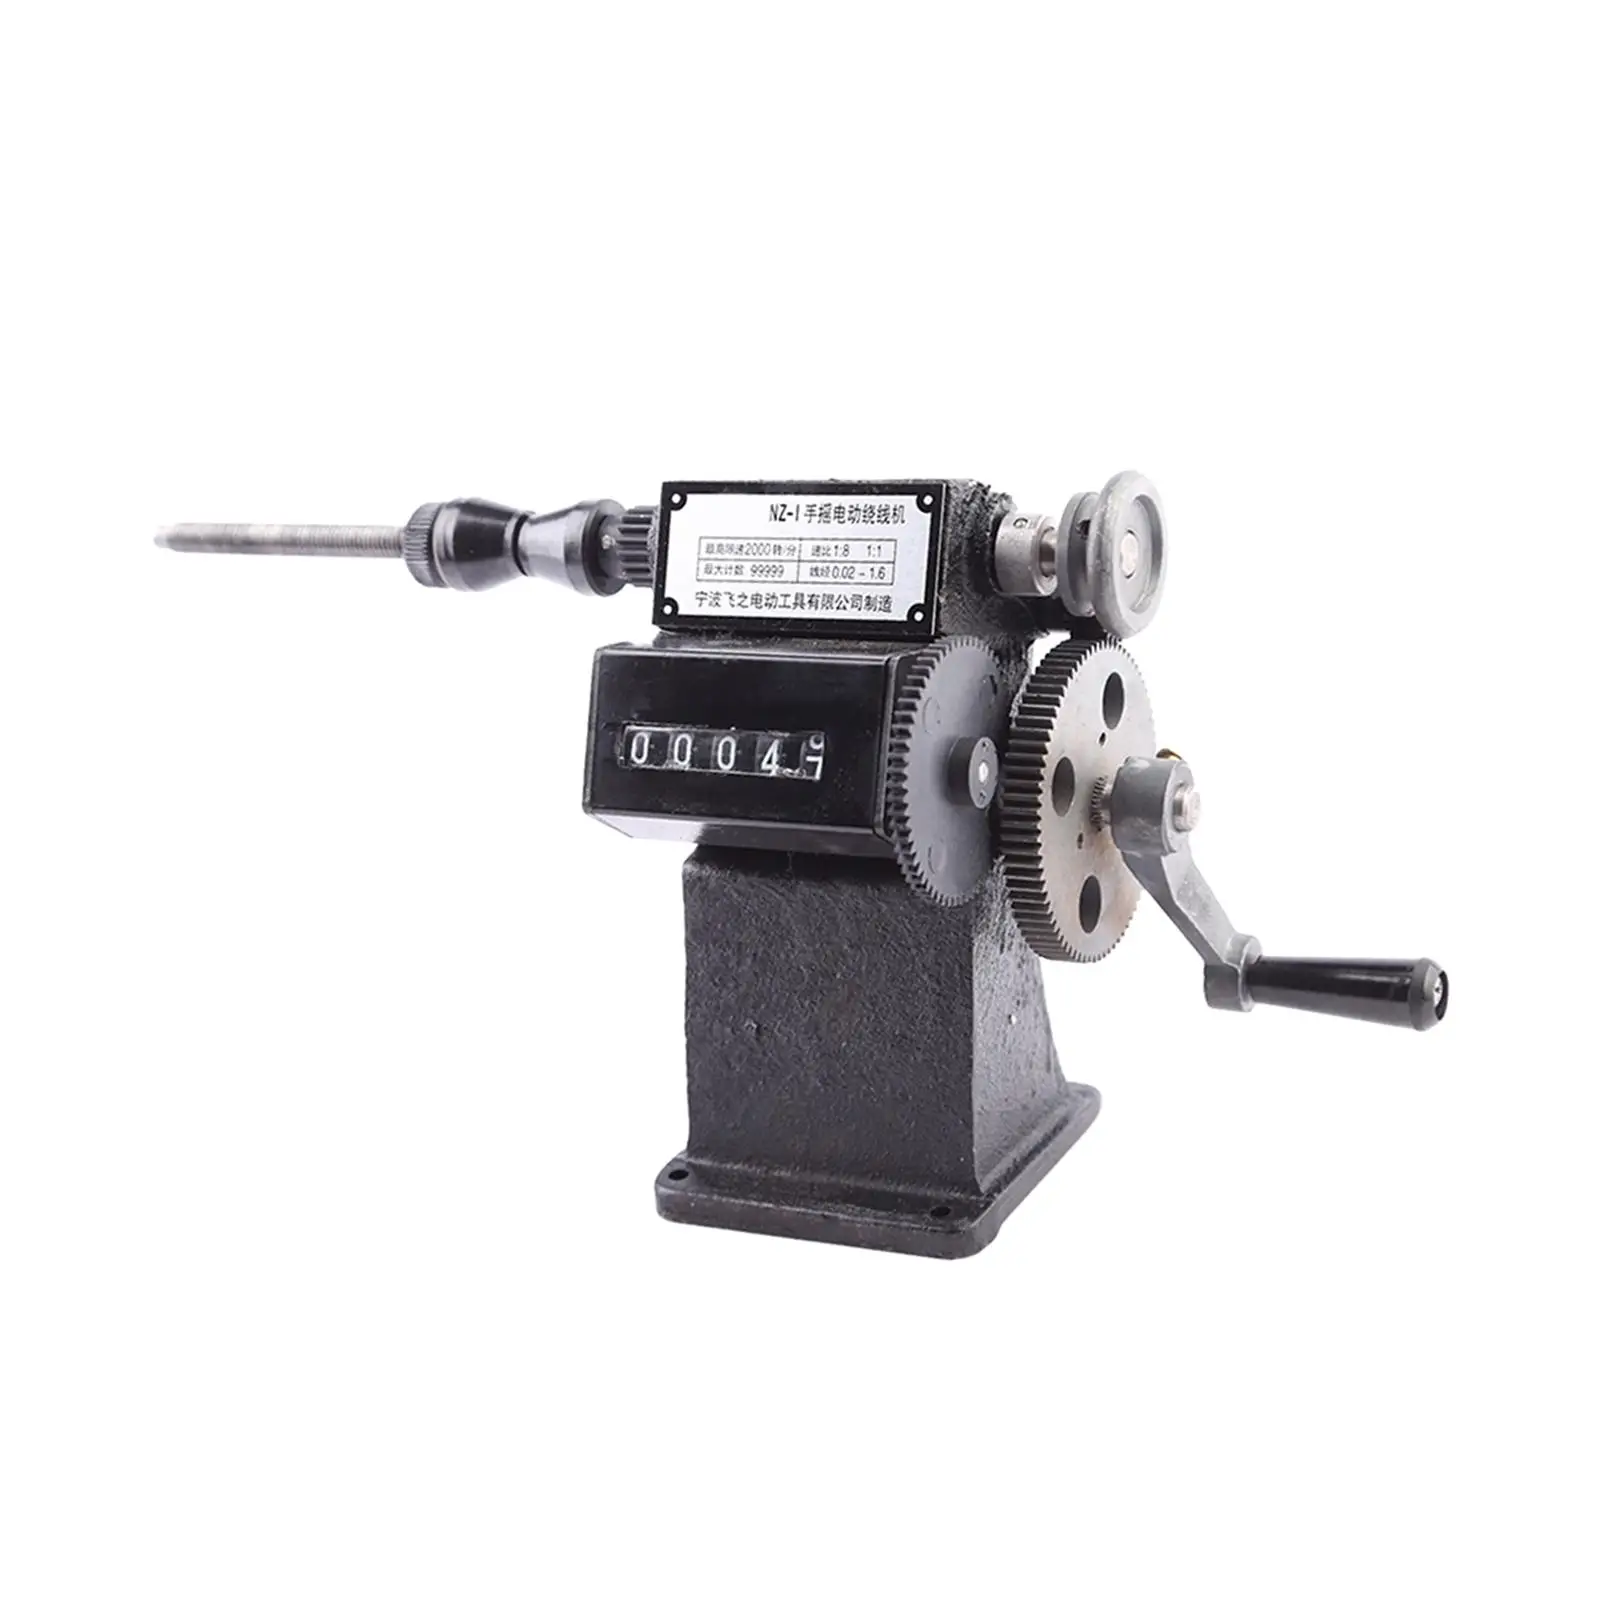 Manual Coil Winder Machine Ratio Speeds 1:8 Hand Coil Winding for Motor Coils Sewing Fishing Wire Tassel Elastic String